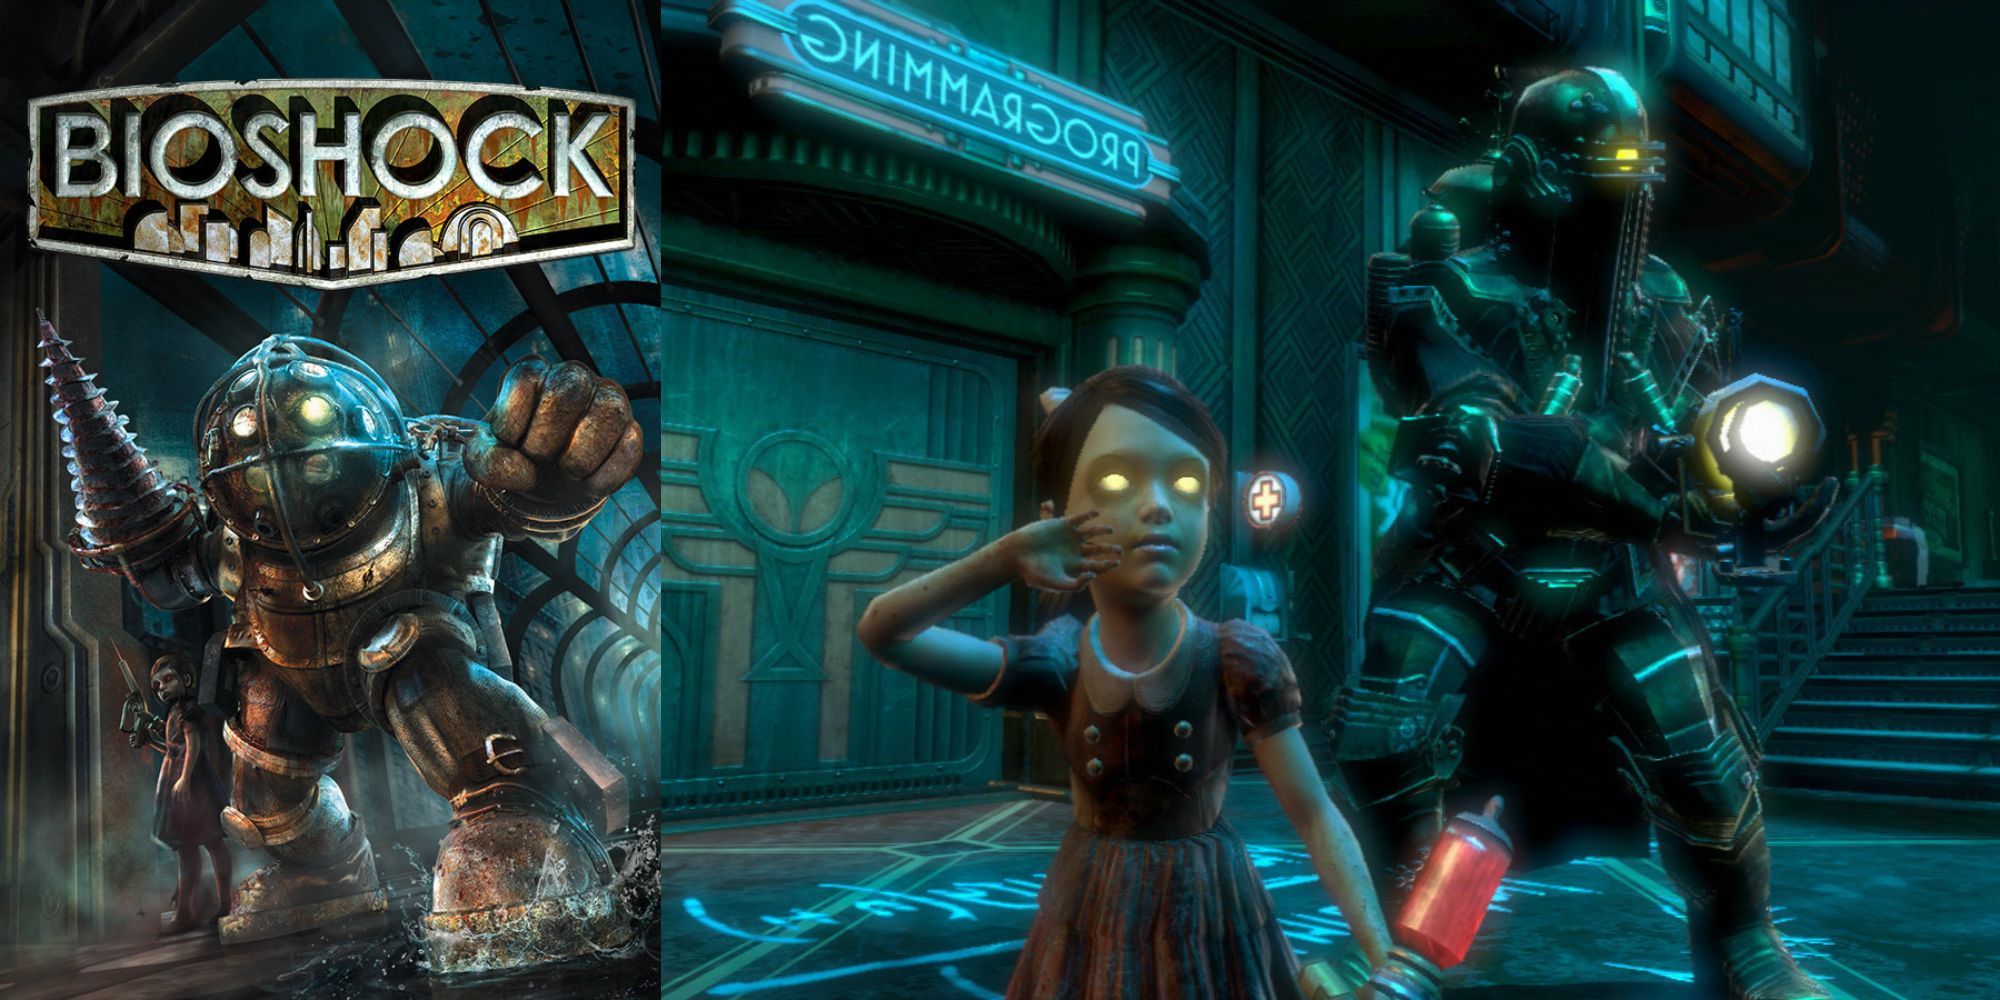 Bioshock cover art and little sister with player character